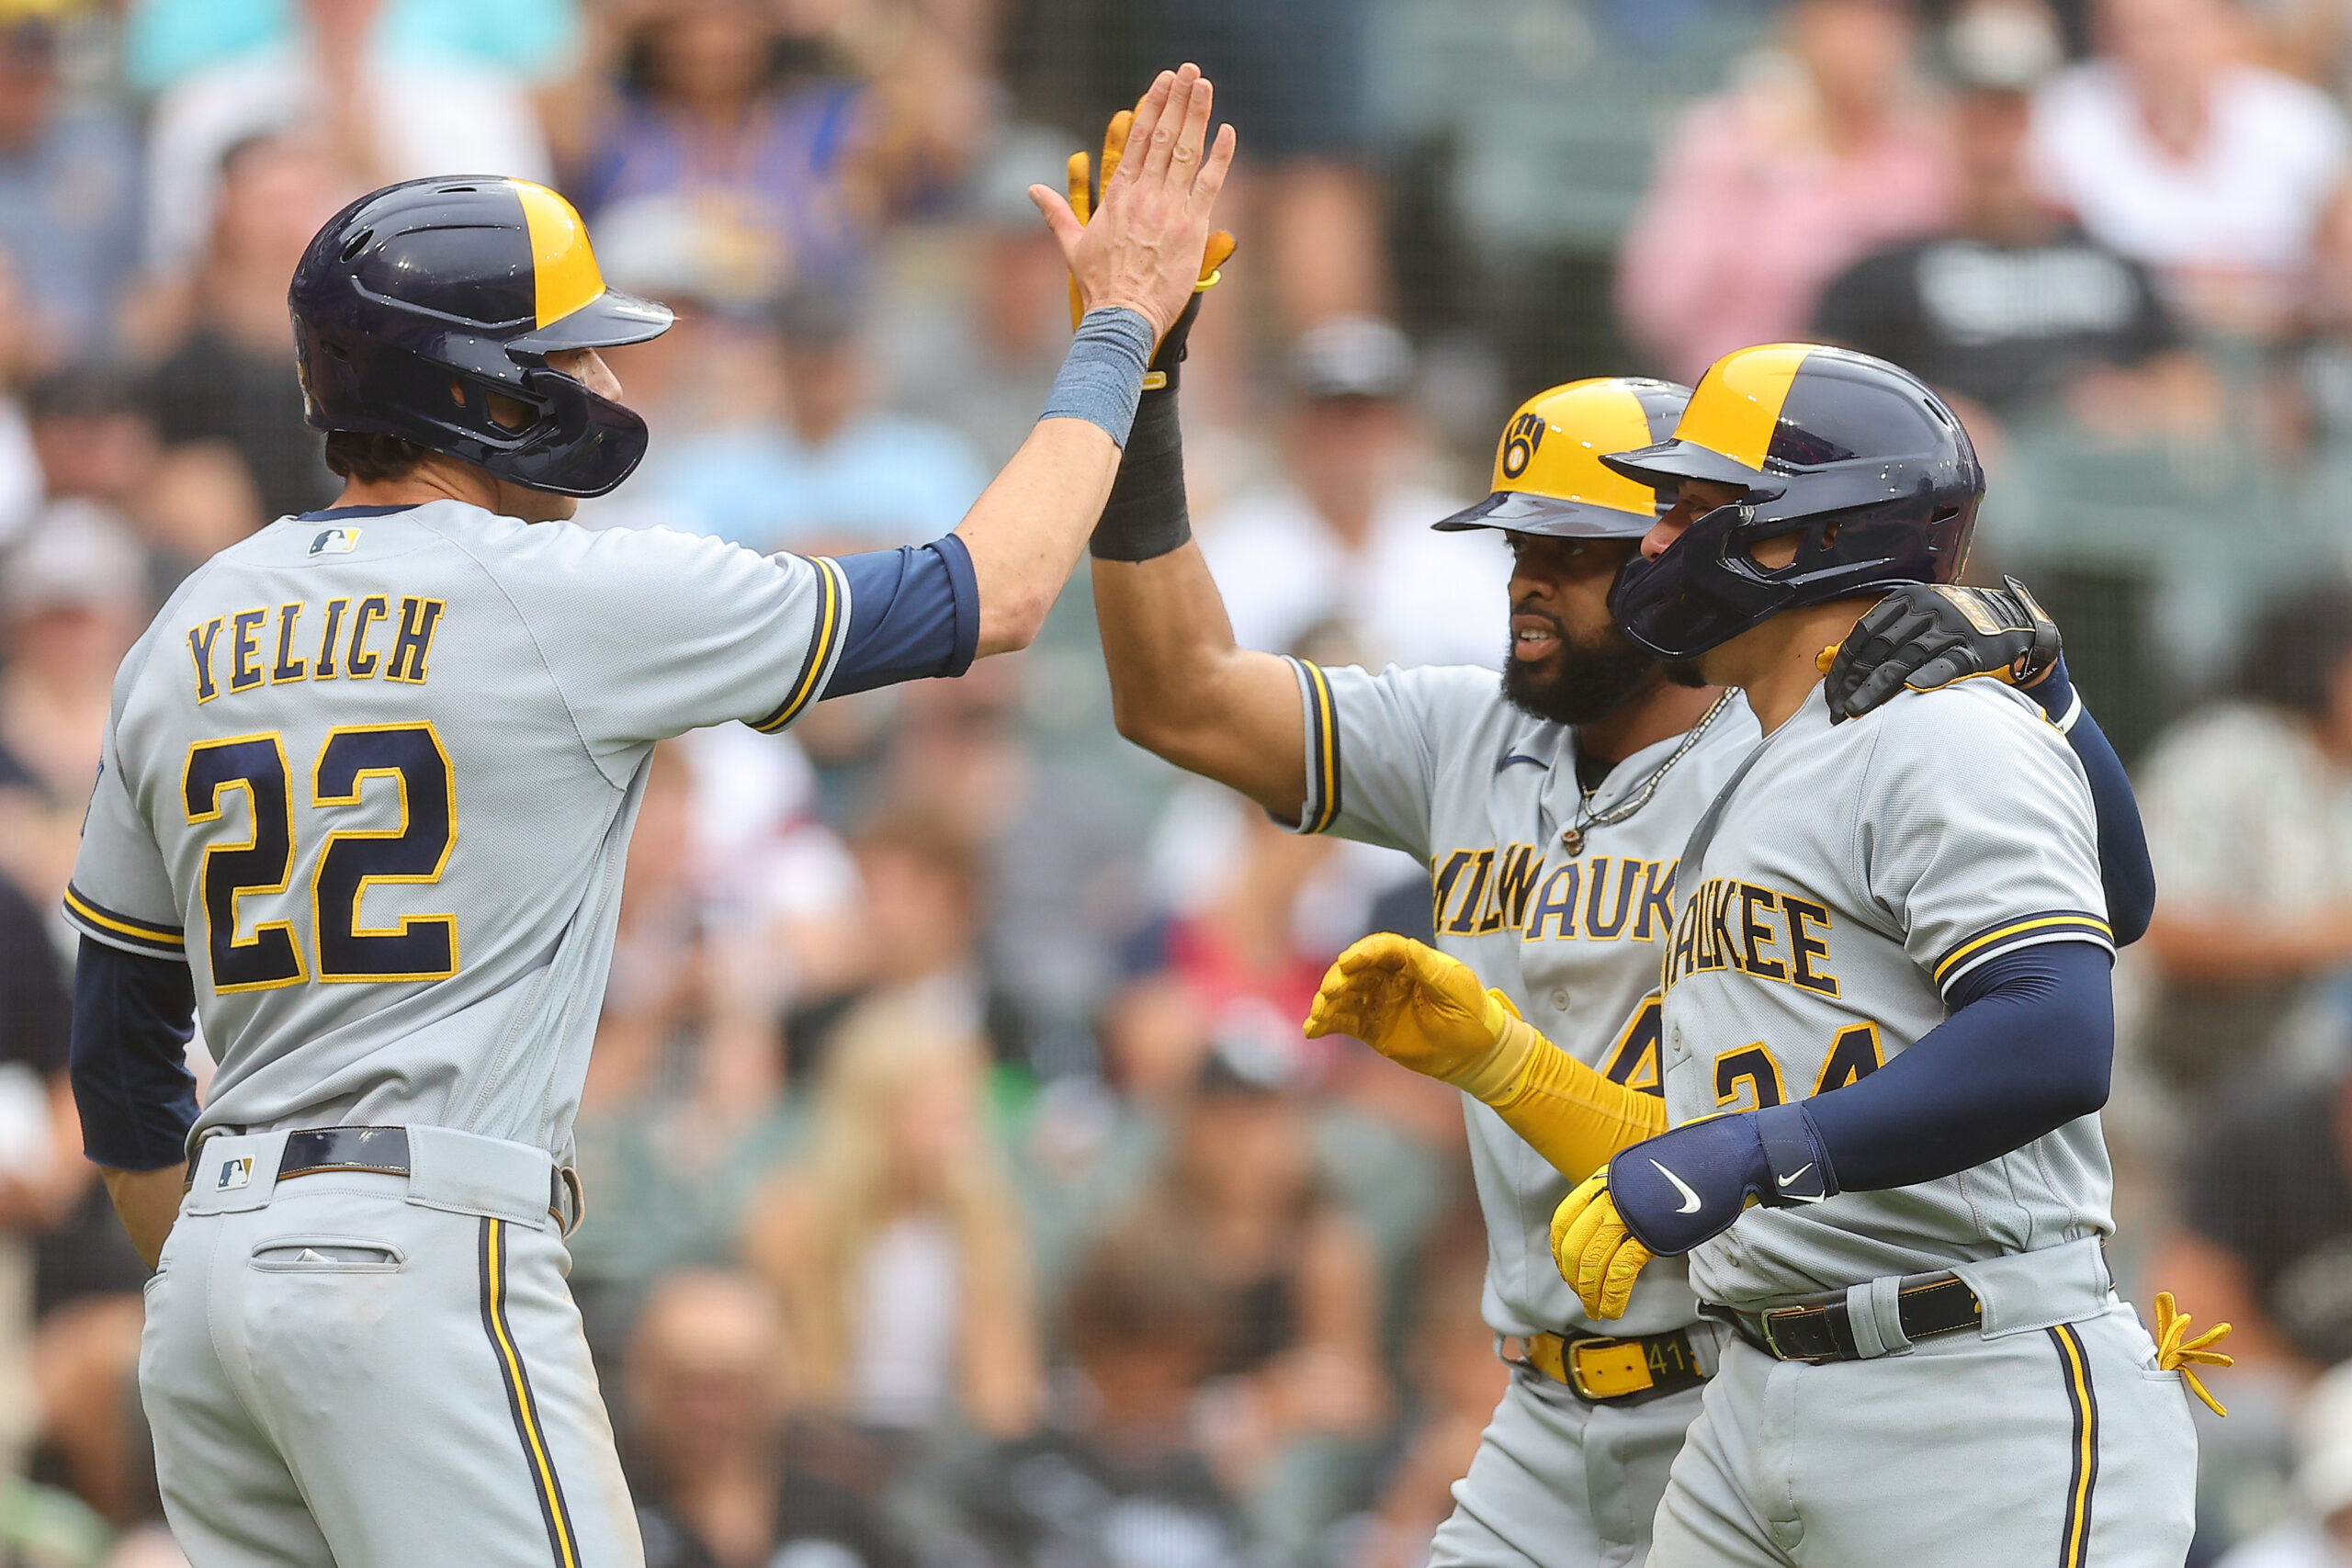 Brewers complete the sweep of the White Sox, winning 7-3